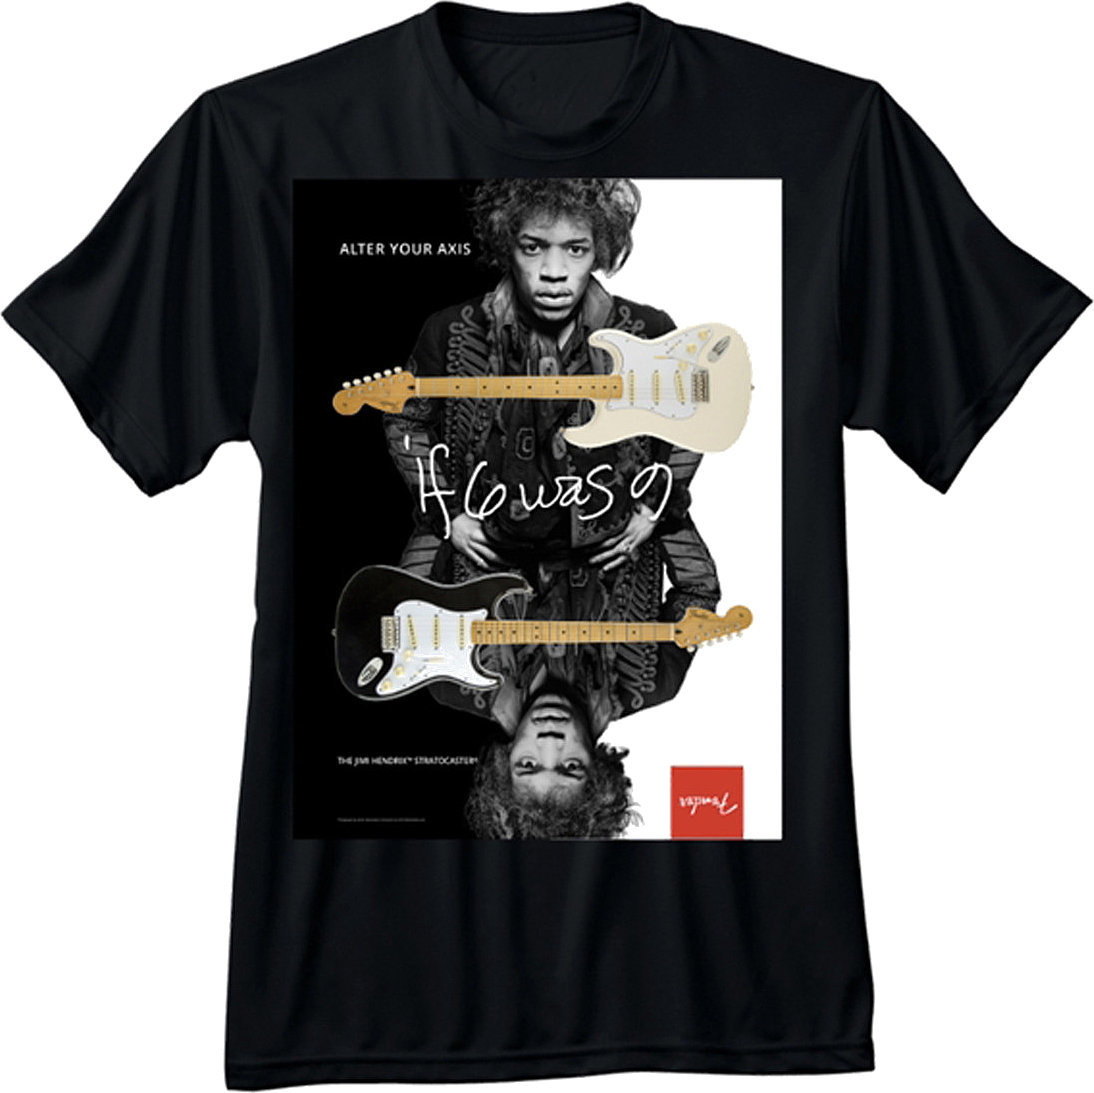 Ing Fender Jimi Hendrix Collection Alter Your Axis T-Shirt Black XL